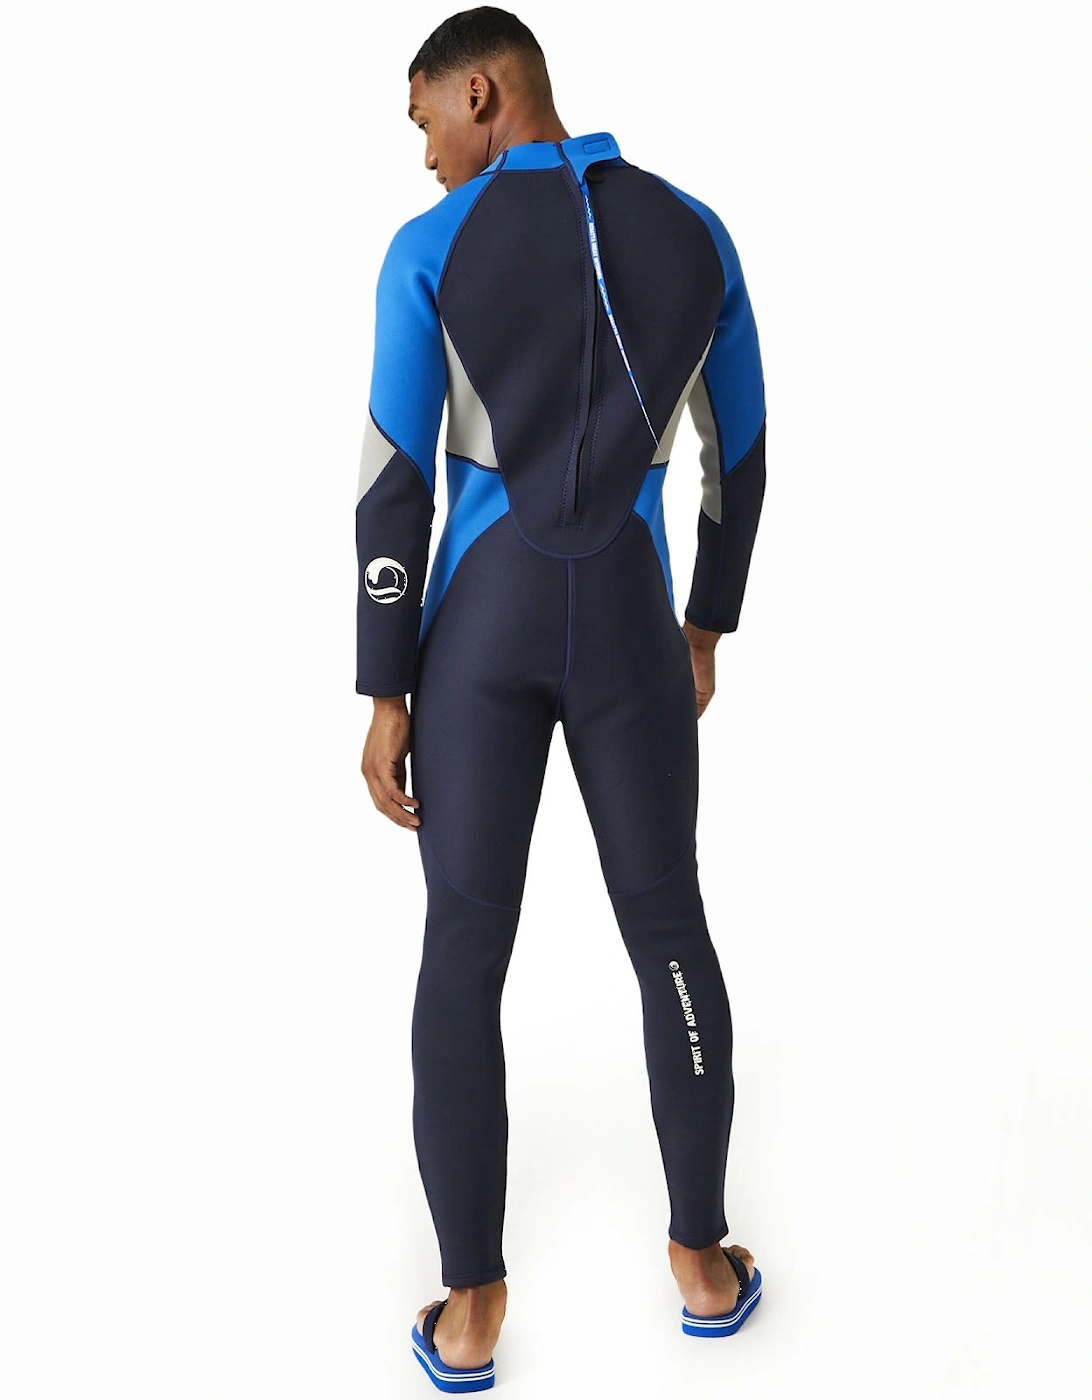 Mens Back Zip Outdoor Surfing Full Length Wetsuit - Navy Oxford Blue